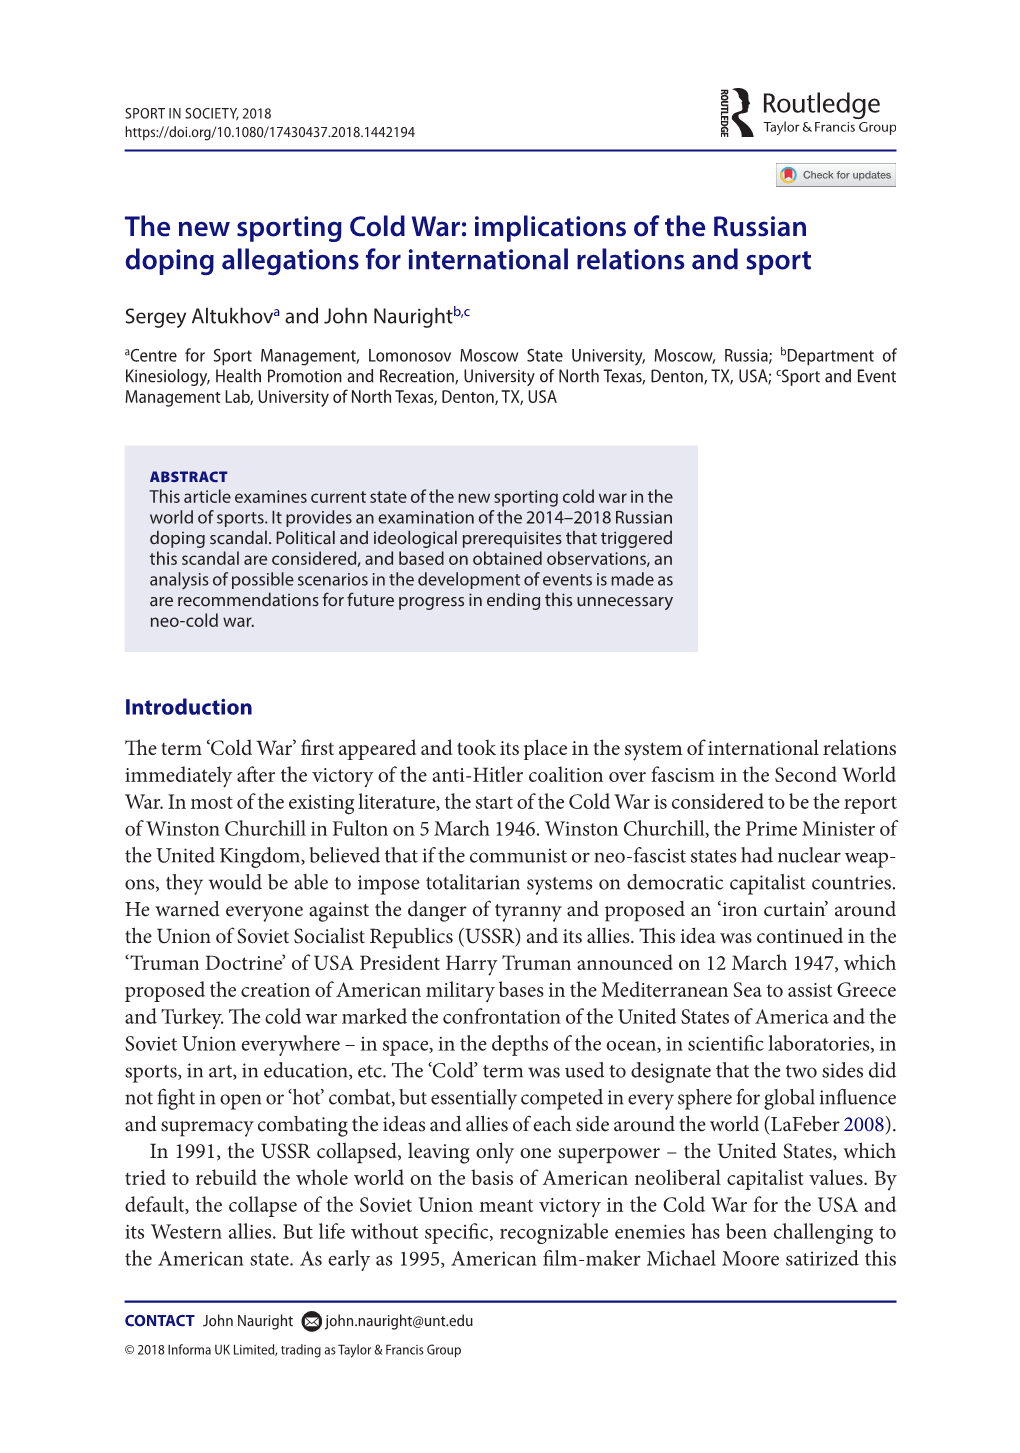 The New Sporting Cold War: Implications of the Russian Doping Allegations for International Relations and Sport